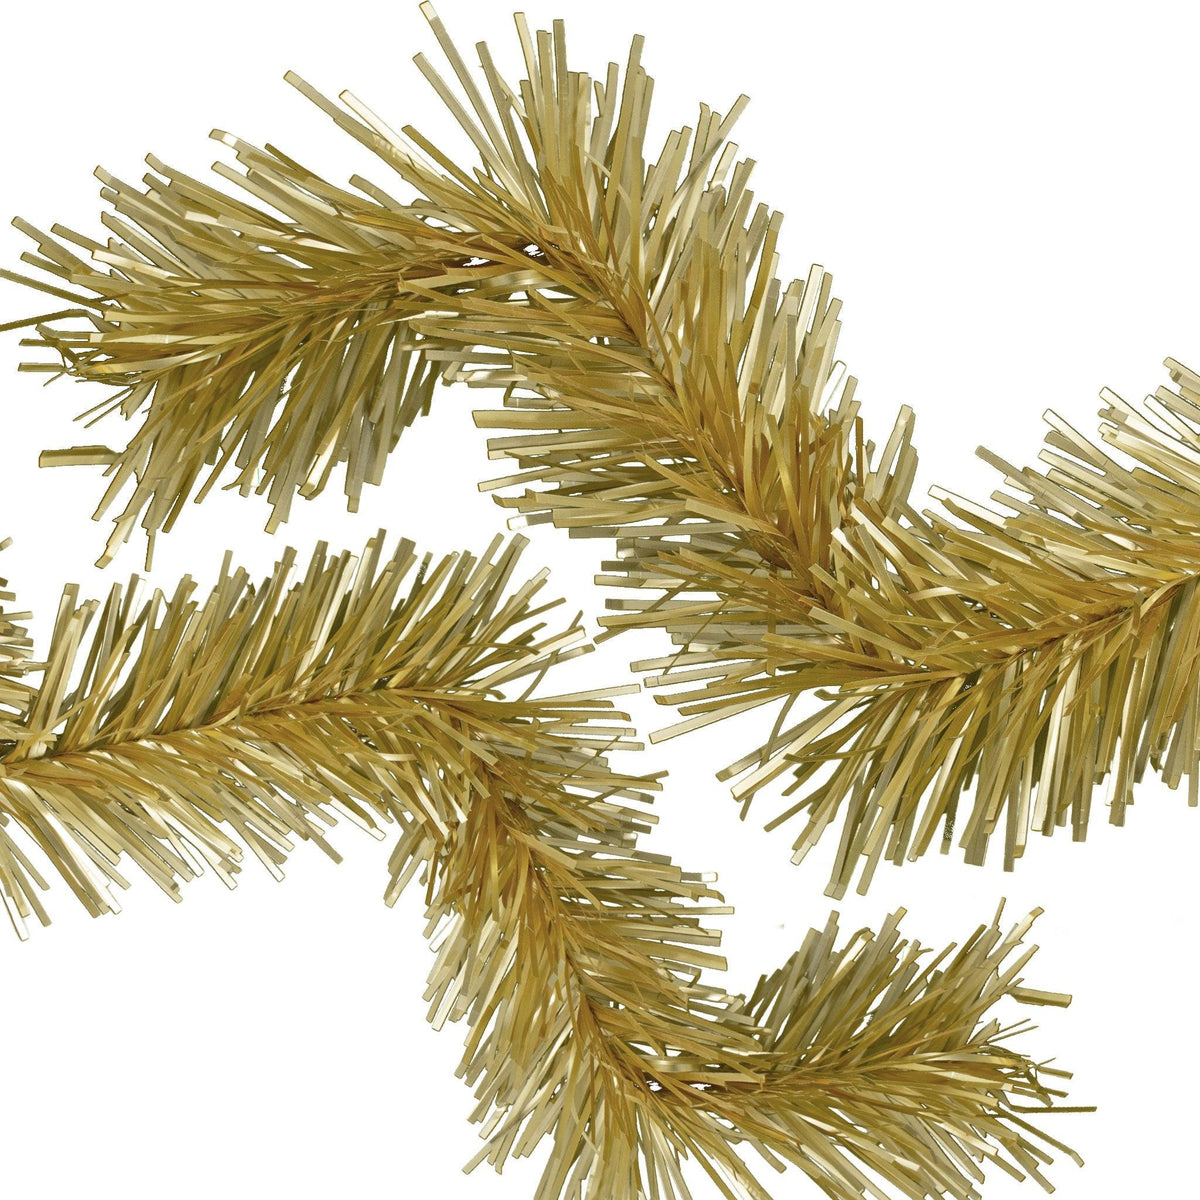 Celebrate Lee Display's 120th Anniversary with our brand new 25FT Antique Gold colored tinsel garland. Shop for tinsel at leedisplay.com